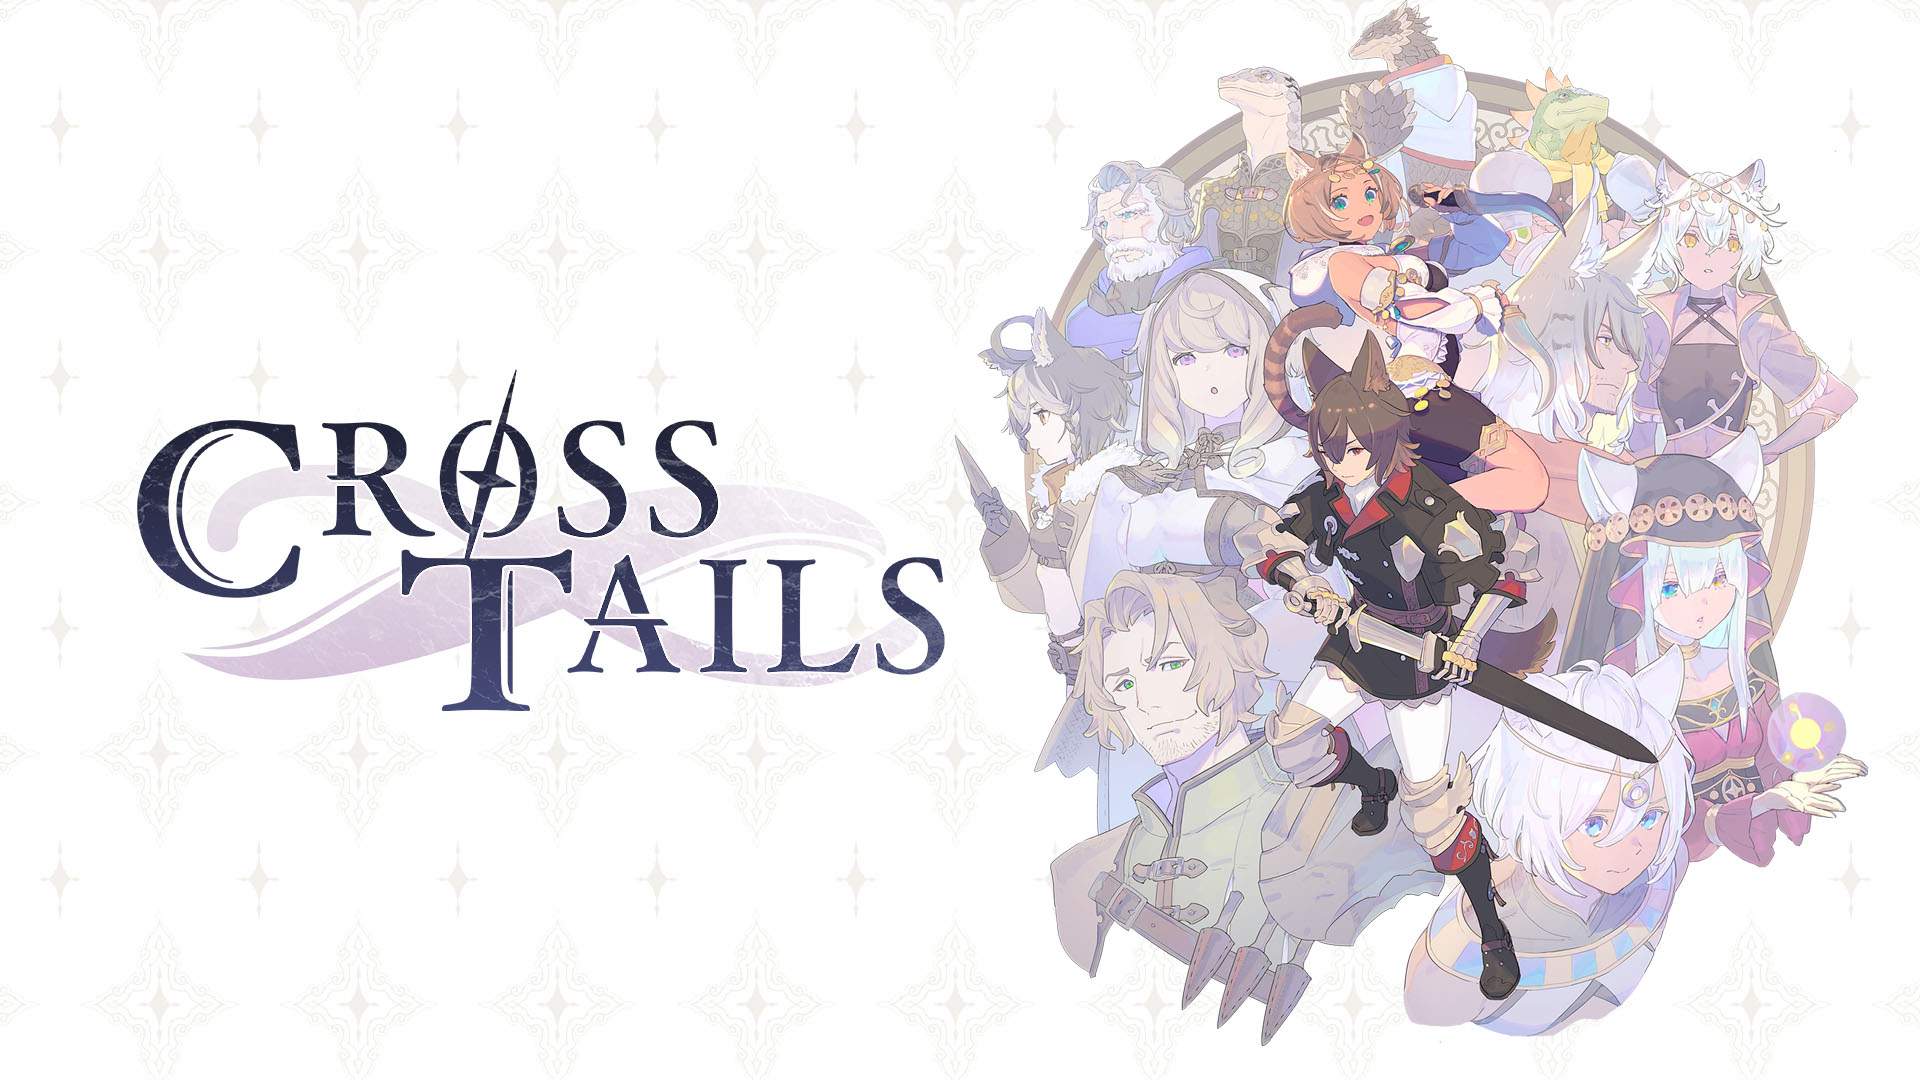 Dogs vs cats retro JRPG Cross Tails gets release date in July